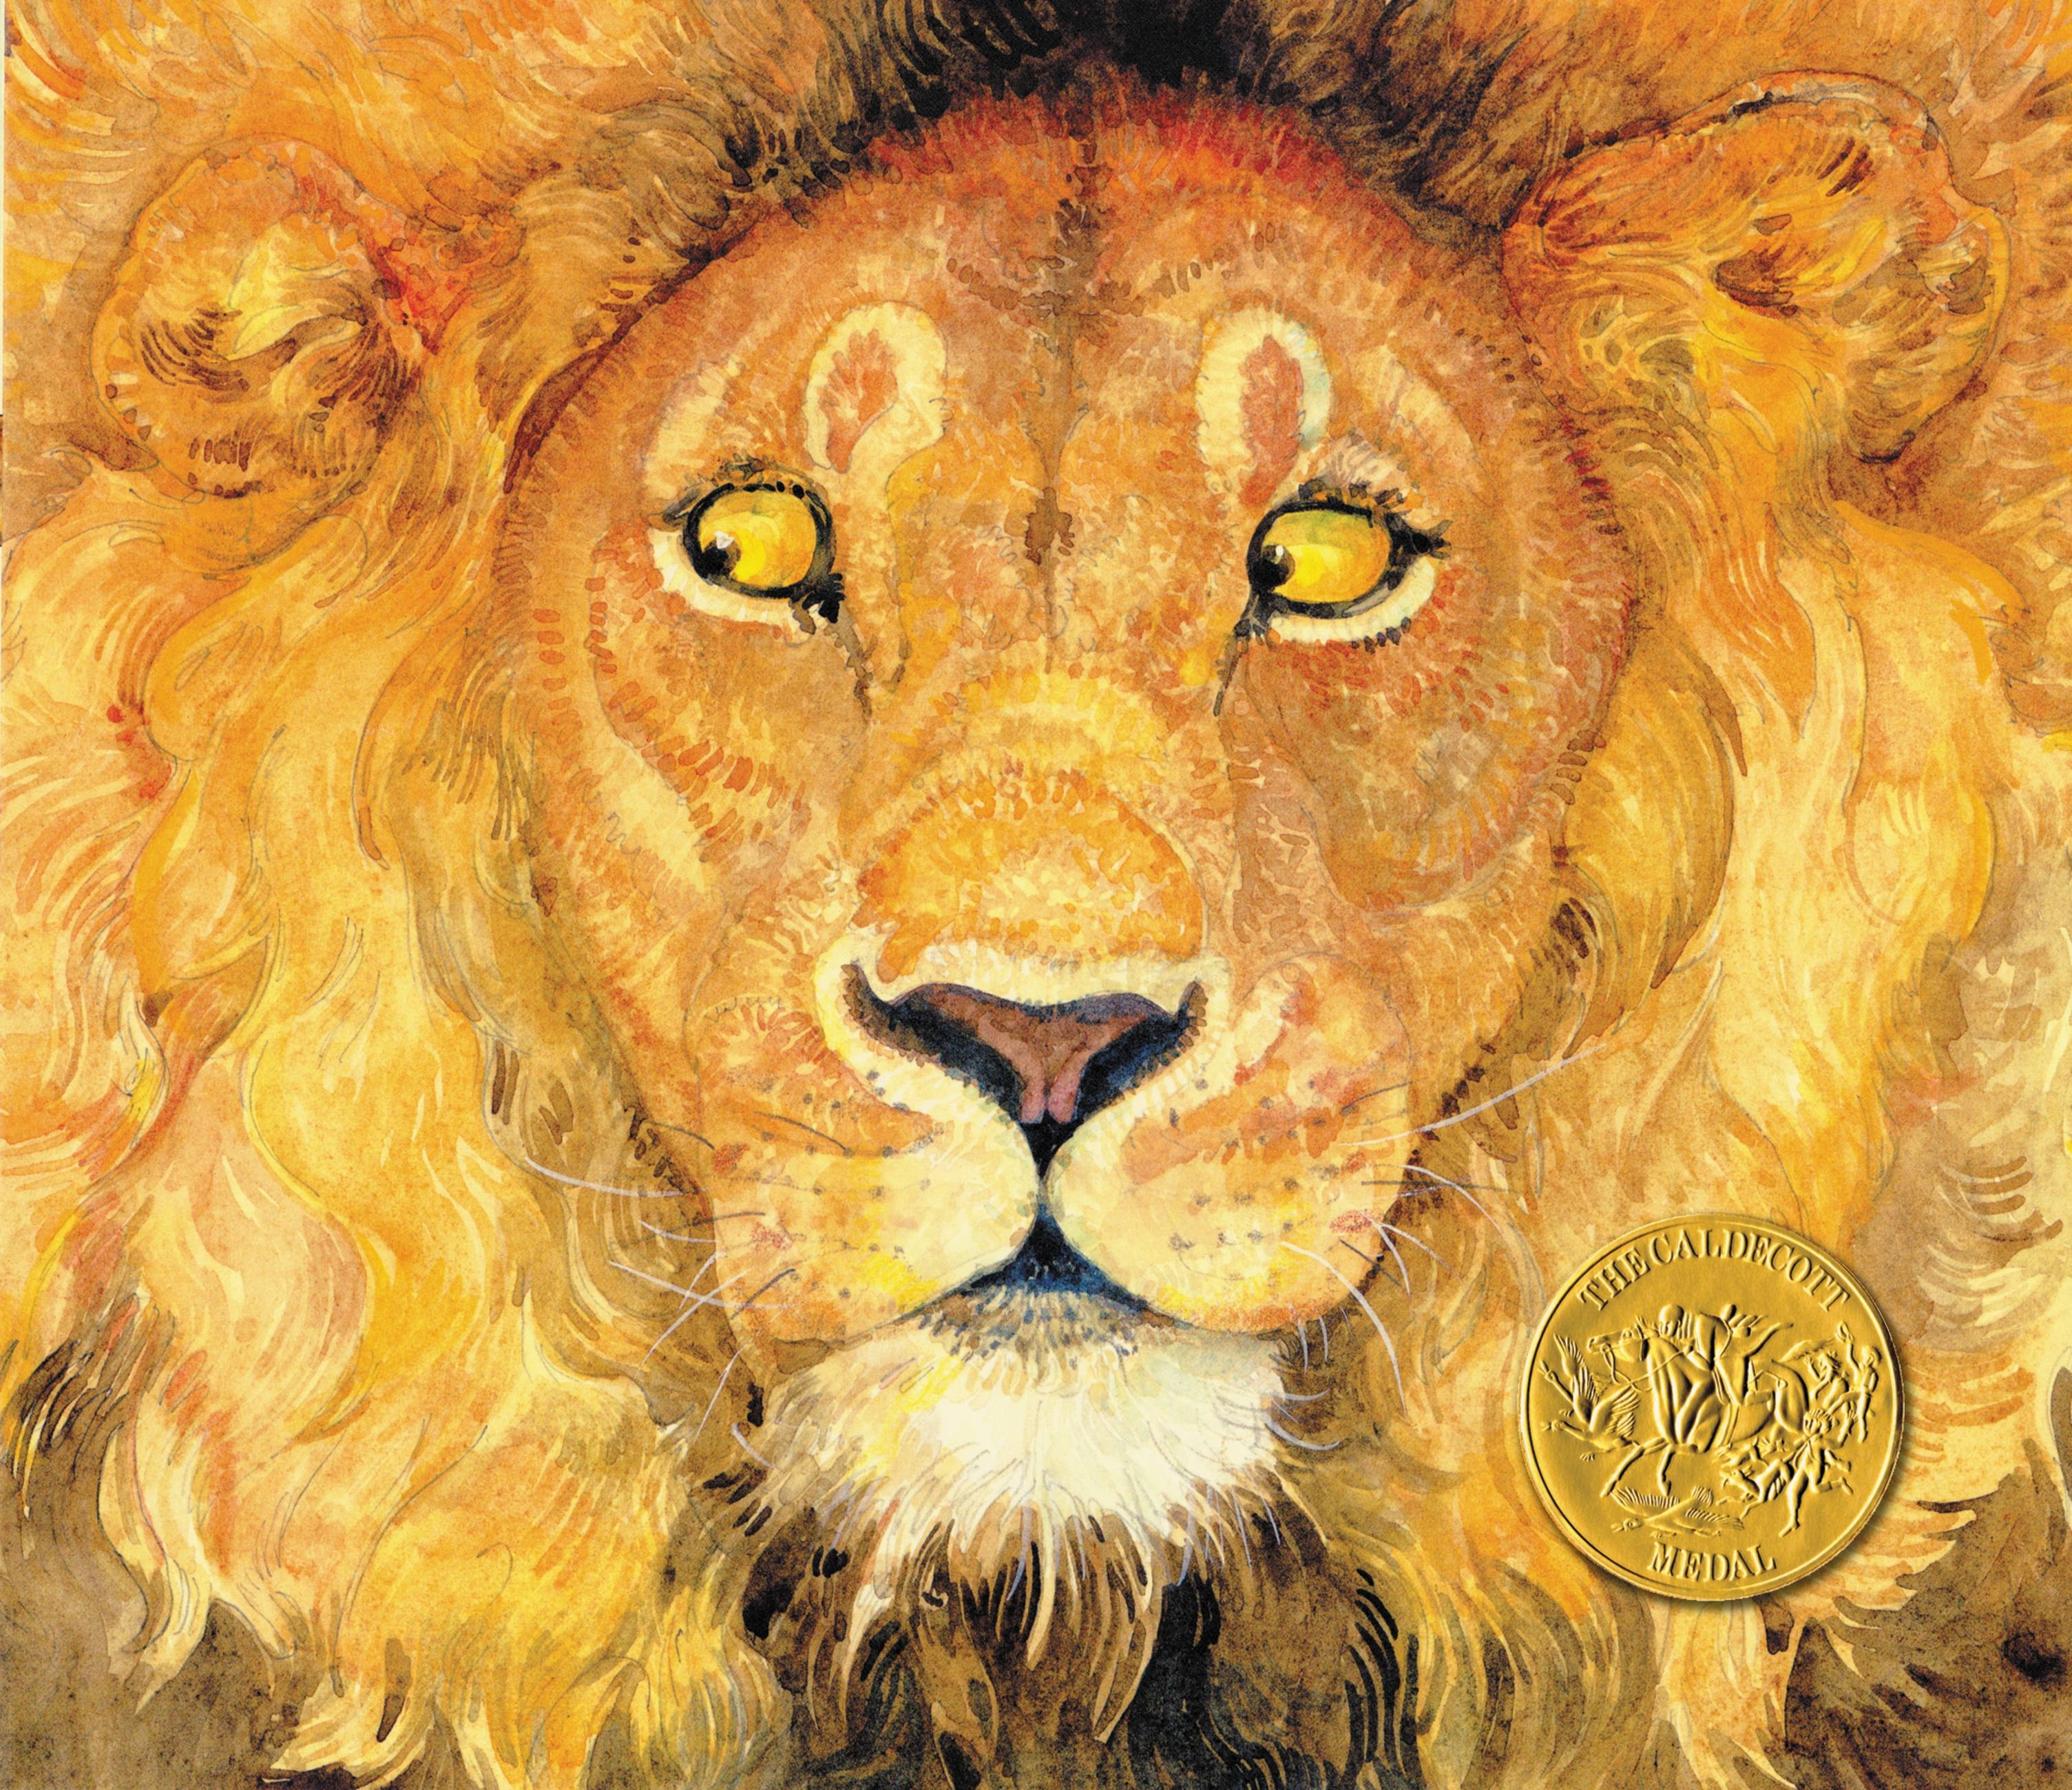 The Lion & the Mouse by Jerry Pinkney | Little, Brown Books for Young